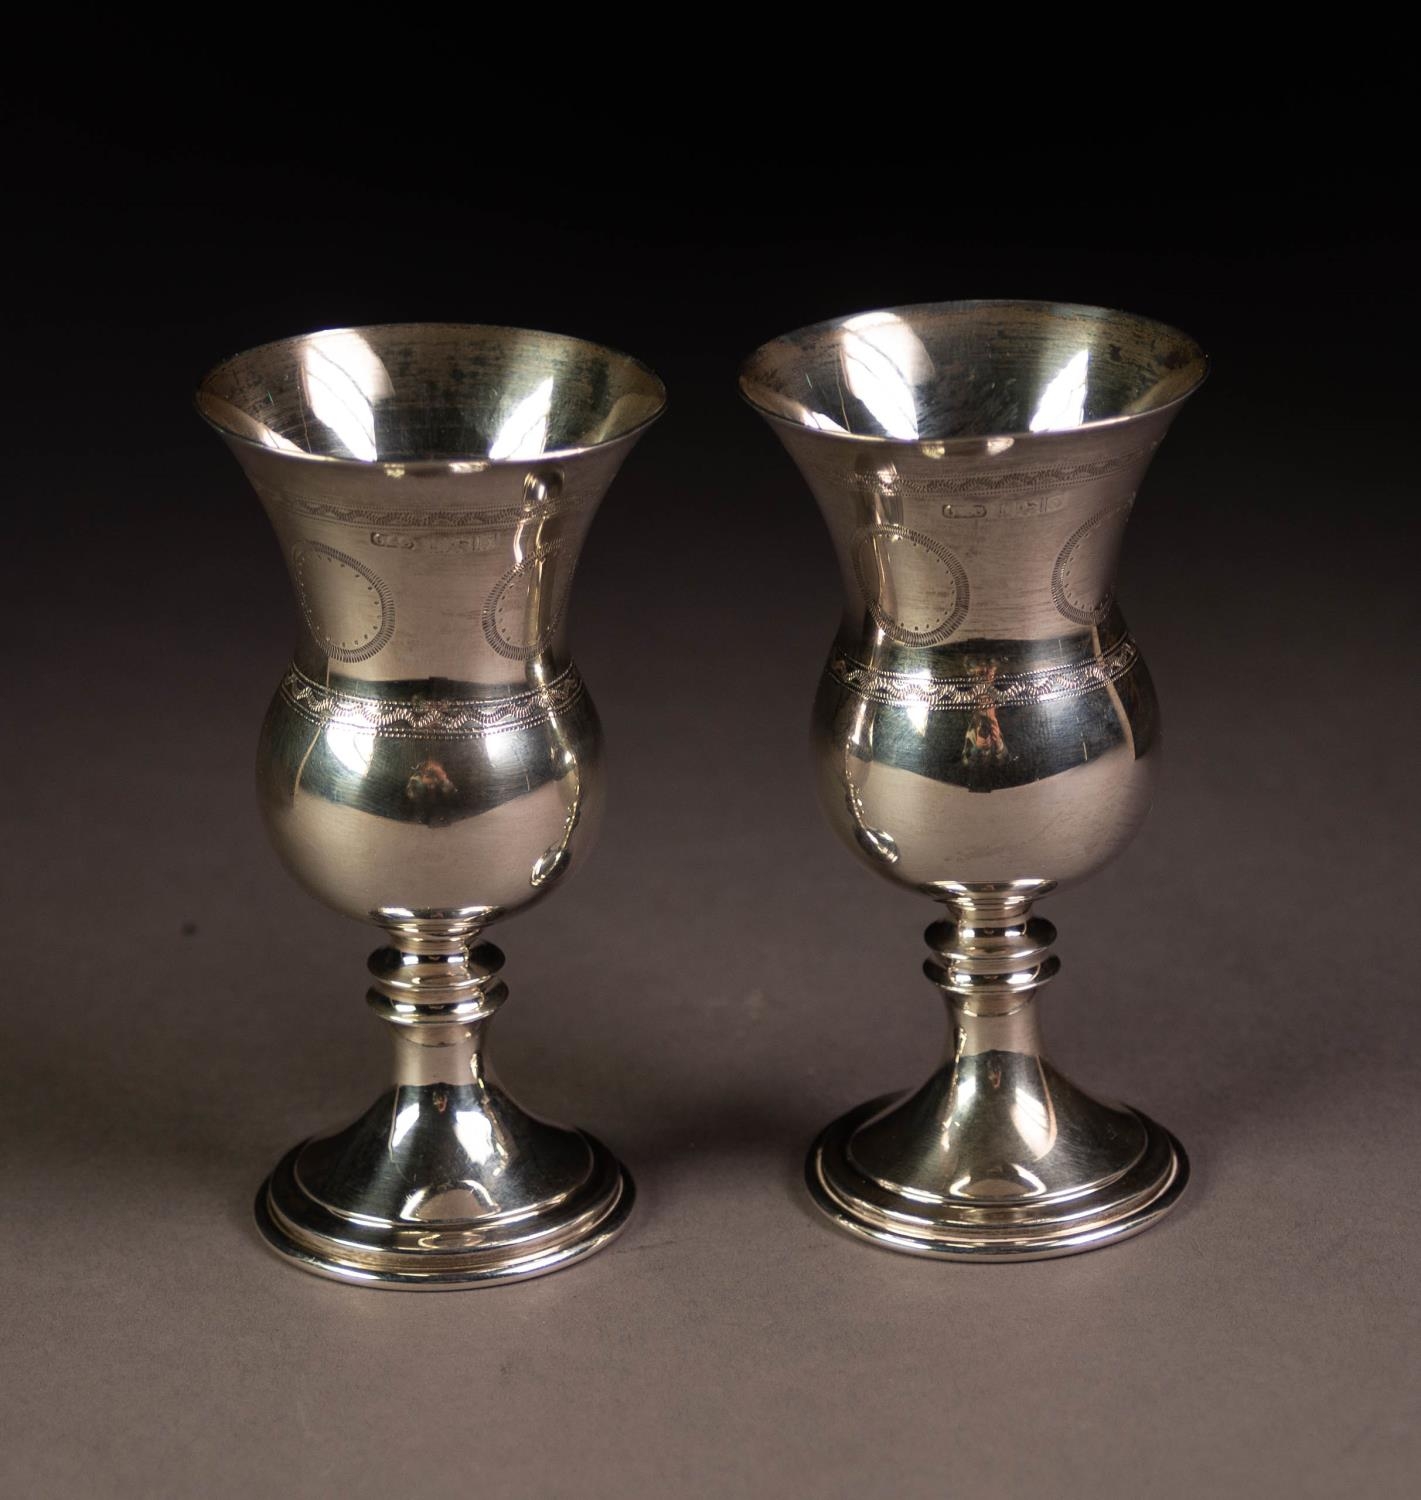 PAIR OF WRIGGLE ENGRAVED SILVER SMALL WINE GOBLETS, each with thistle shaped bowl, knopped stem - Image 2 of 2